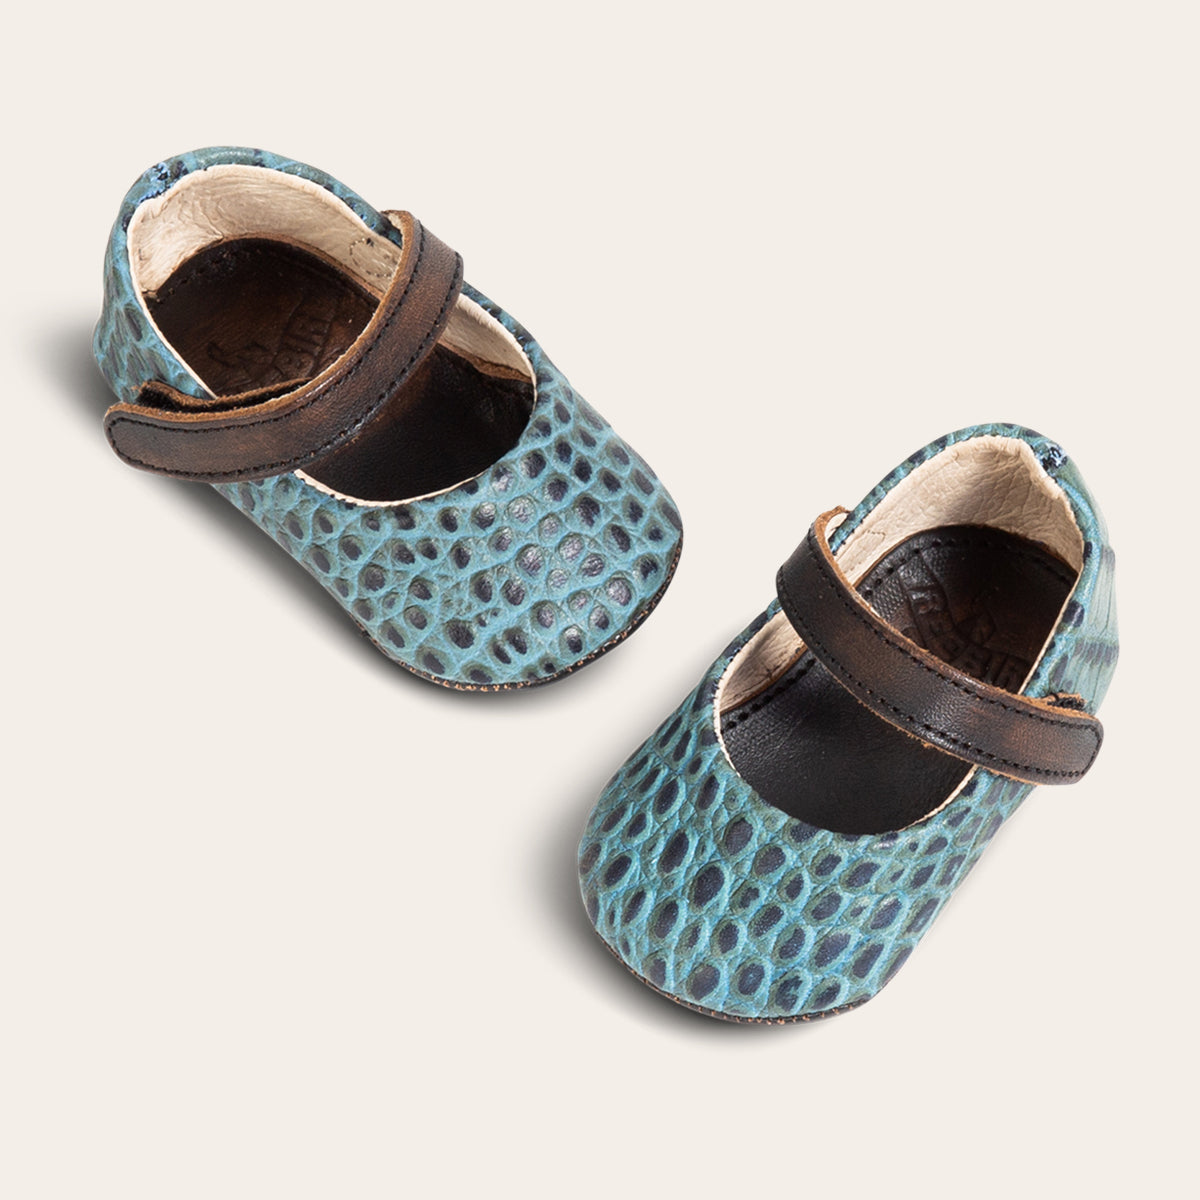 top view showing top leather strap on FREEBIRD infant baby Jane turquoise croco leather shoe